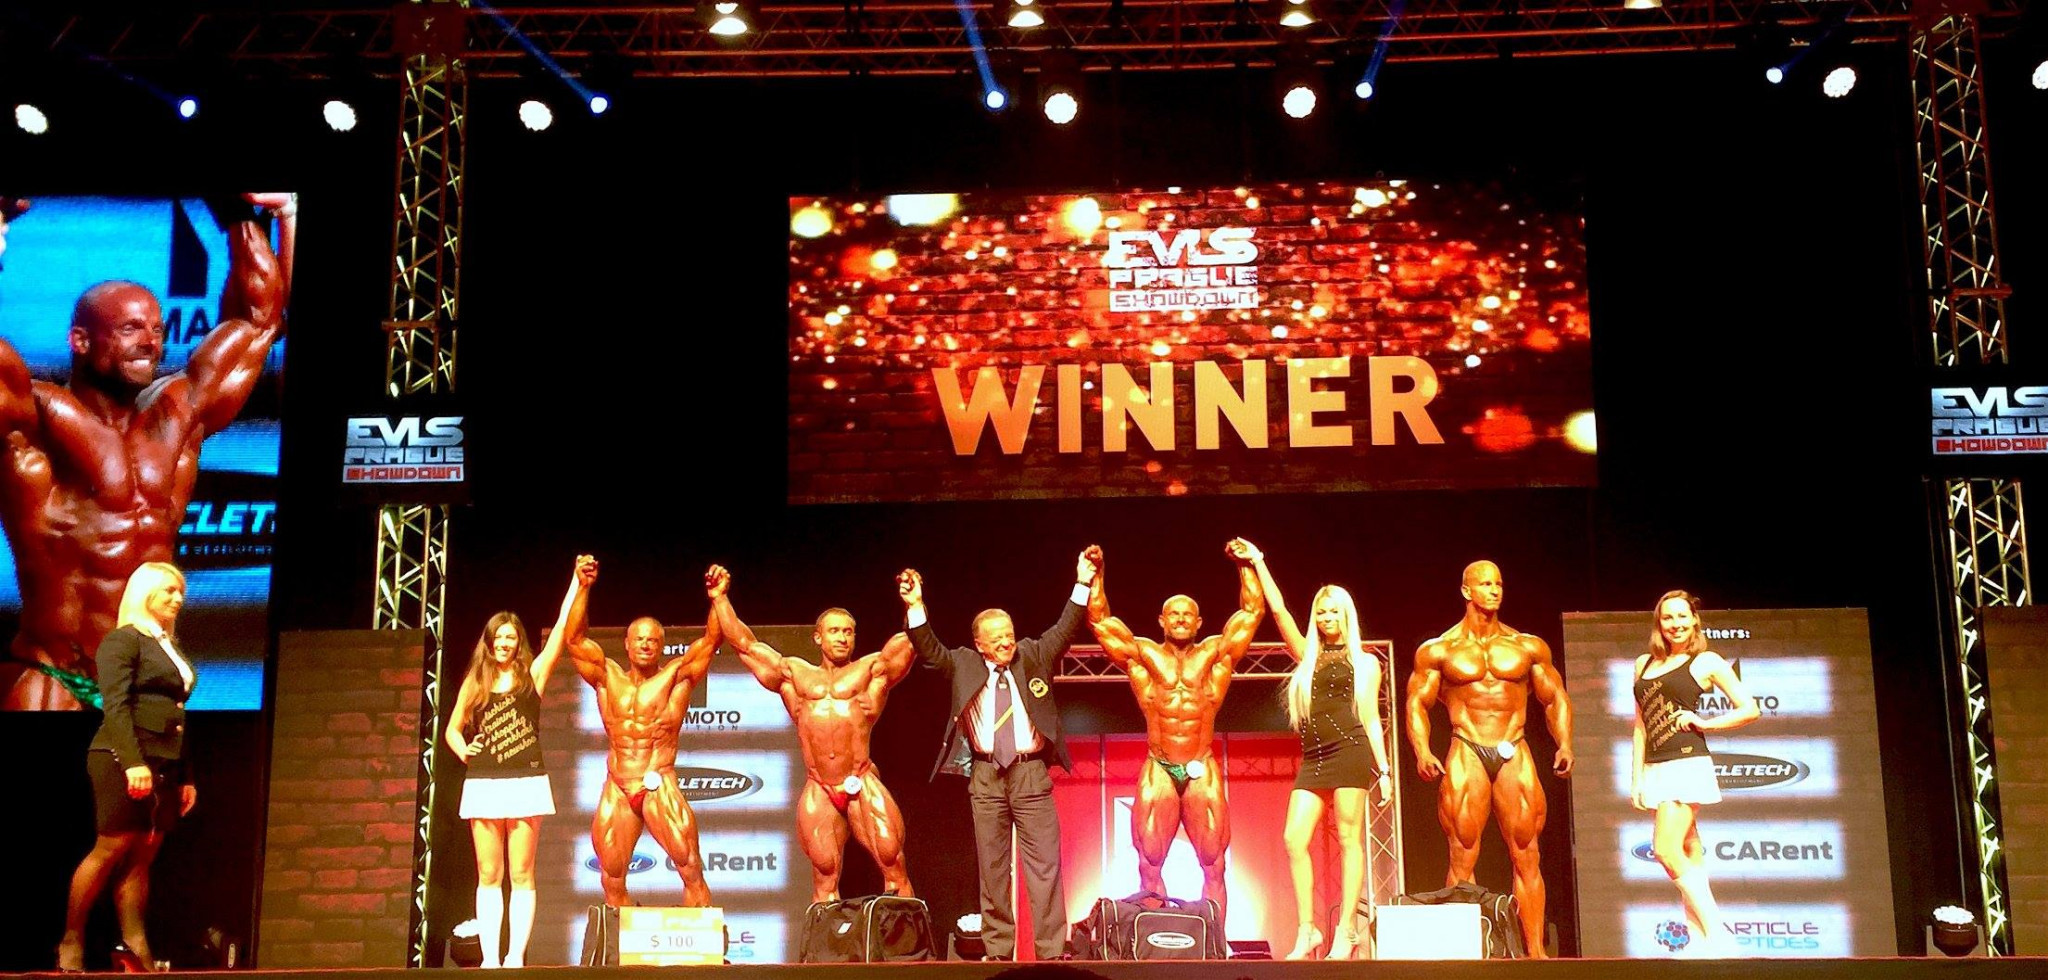 IFBB celebrates eventful weekend of bodybuilding competitions across Europe